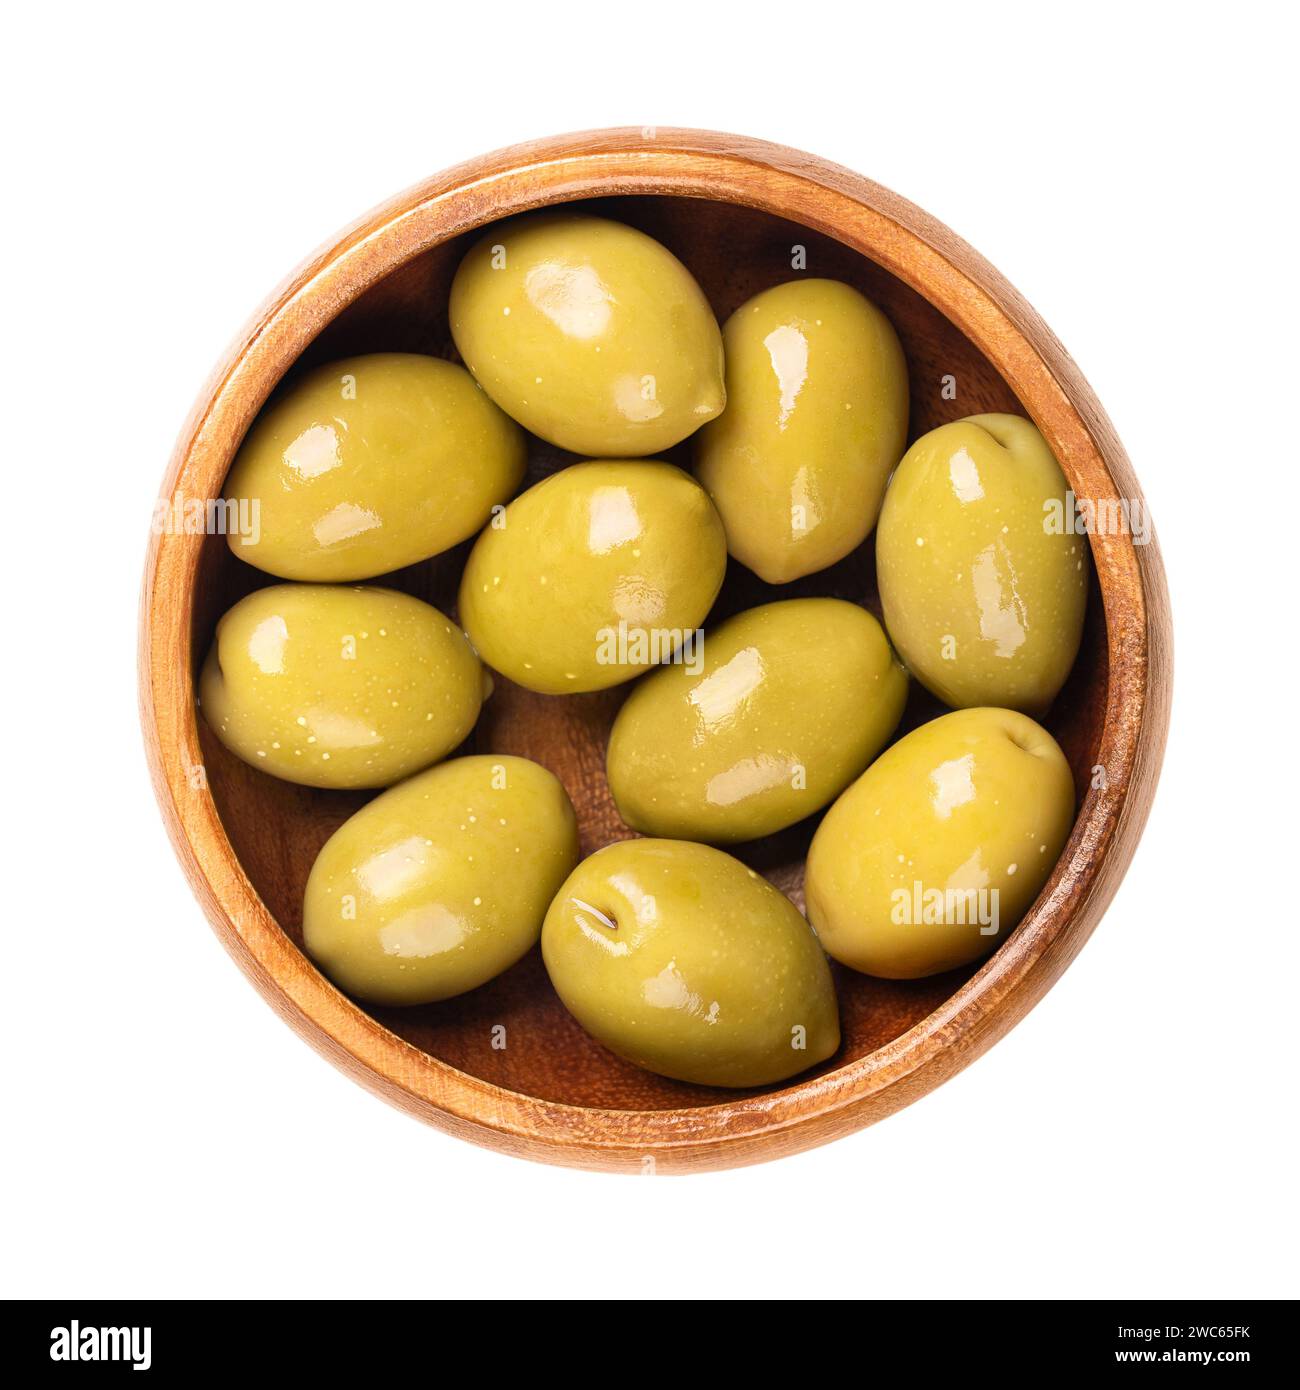 Green olives with pit, pickled whole, large Greek table olives, in a wooden bowl. Whole fruits, picked when they are still unripe and of bitter taste. Stock Photo